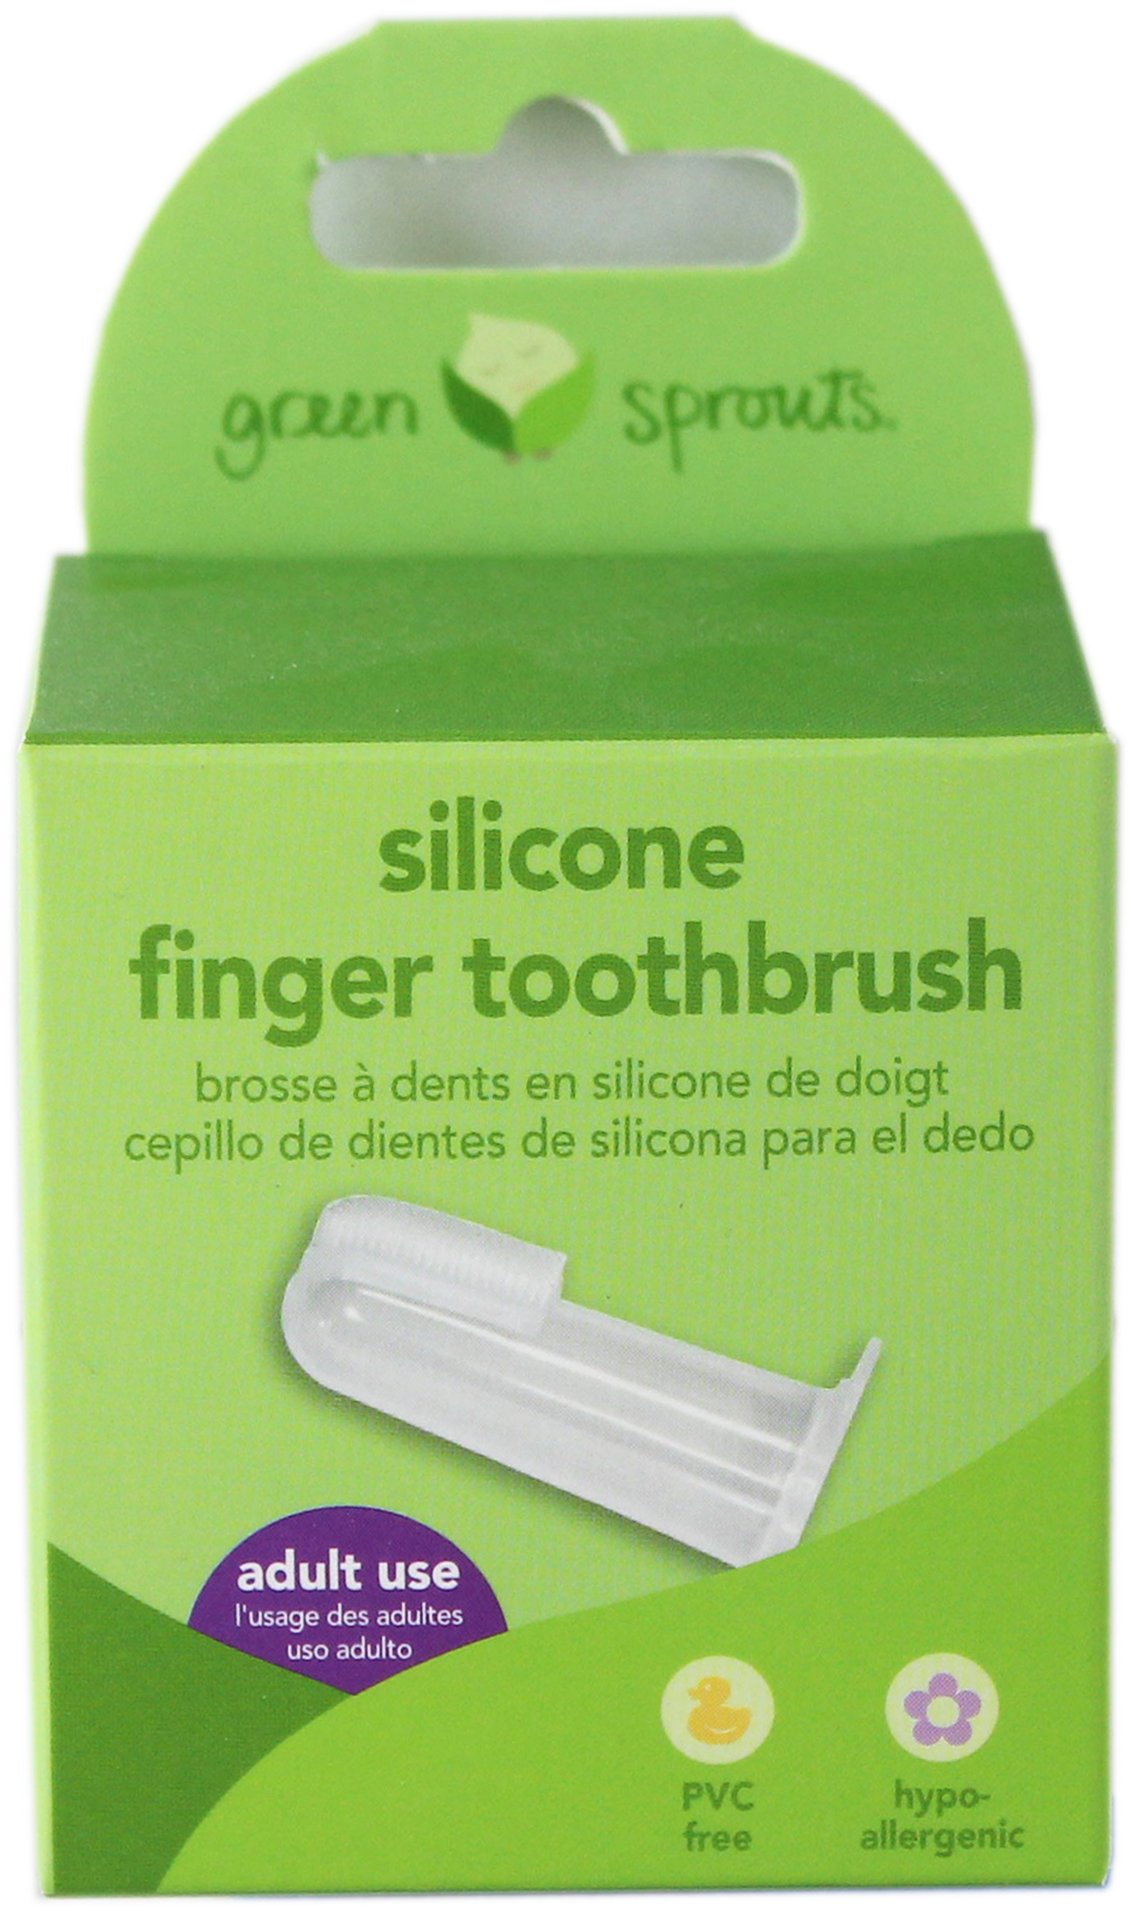 green sprouts silicone toothbrush